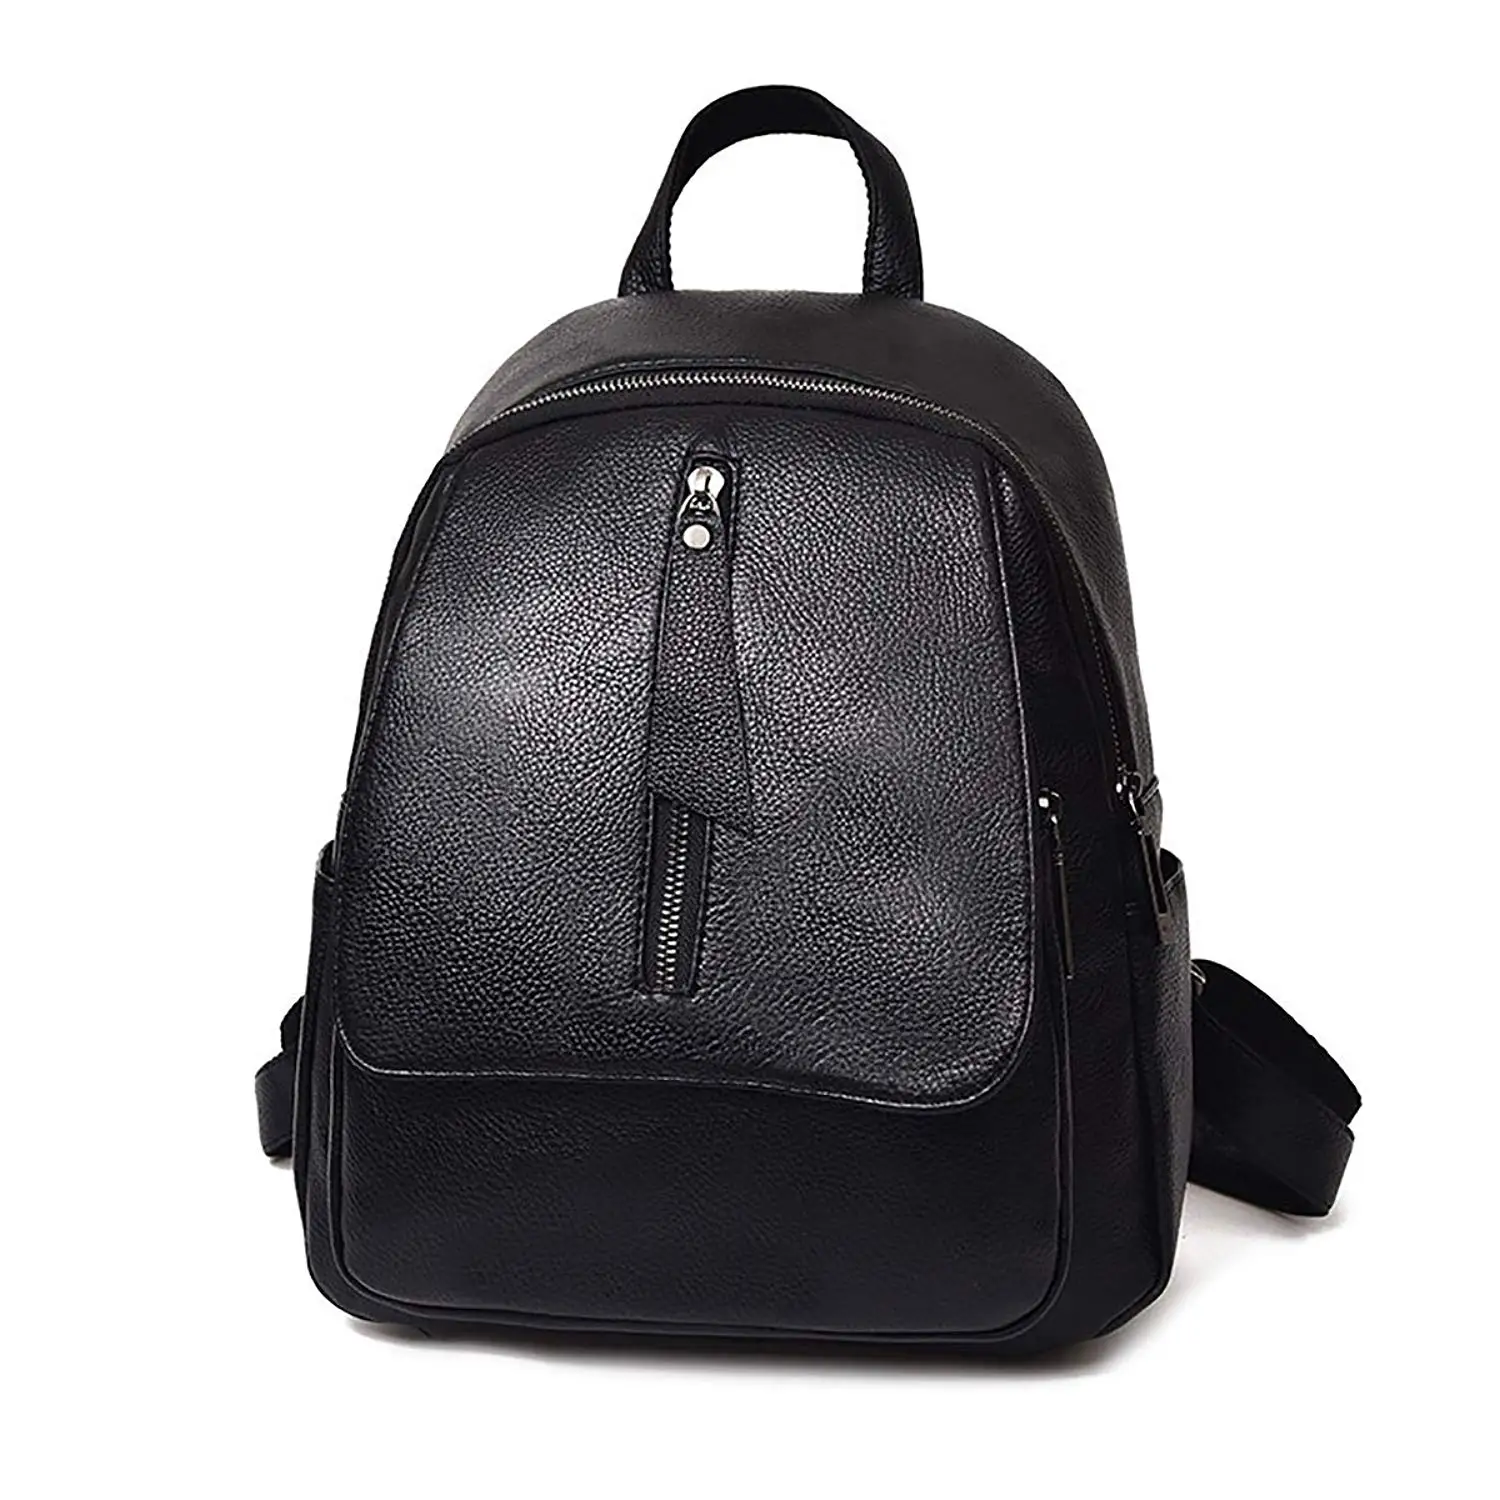 Cheap Womens Black Leather Backpack, find Womens Black Leather Backpack deals on line at literacybasics.ca